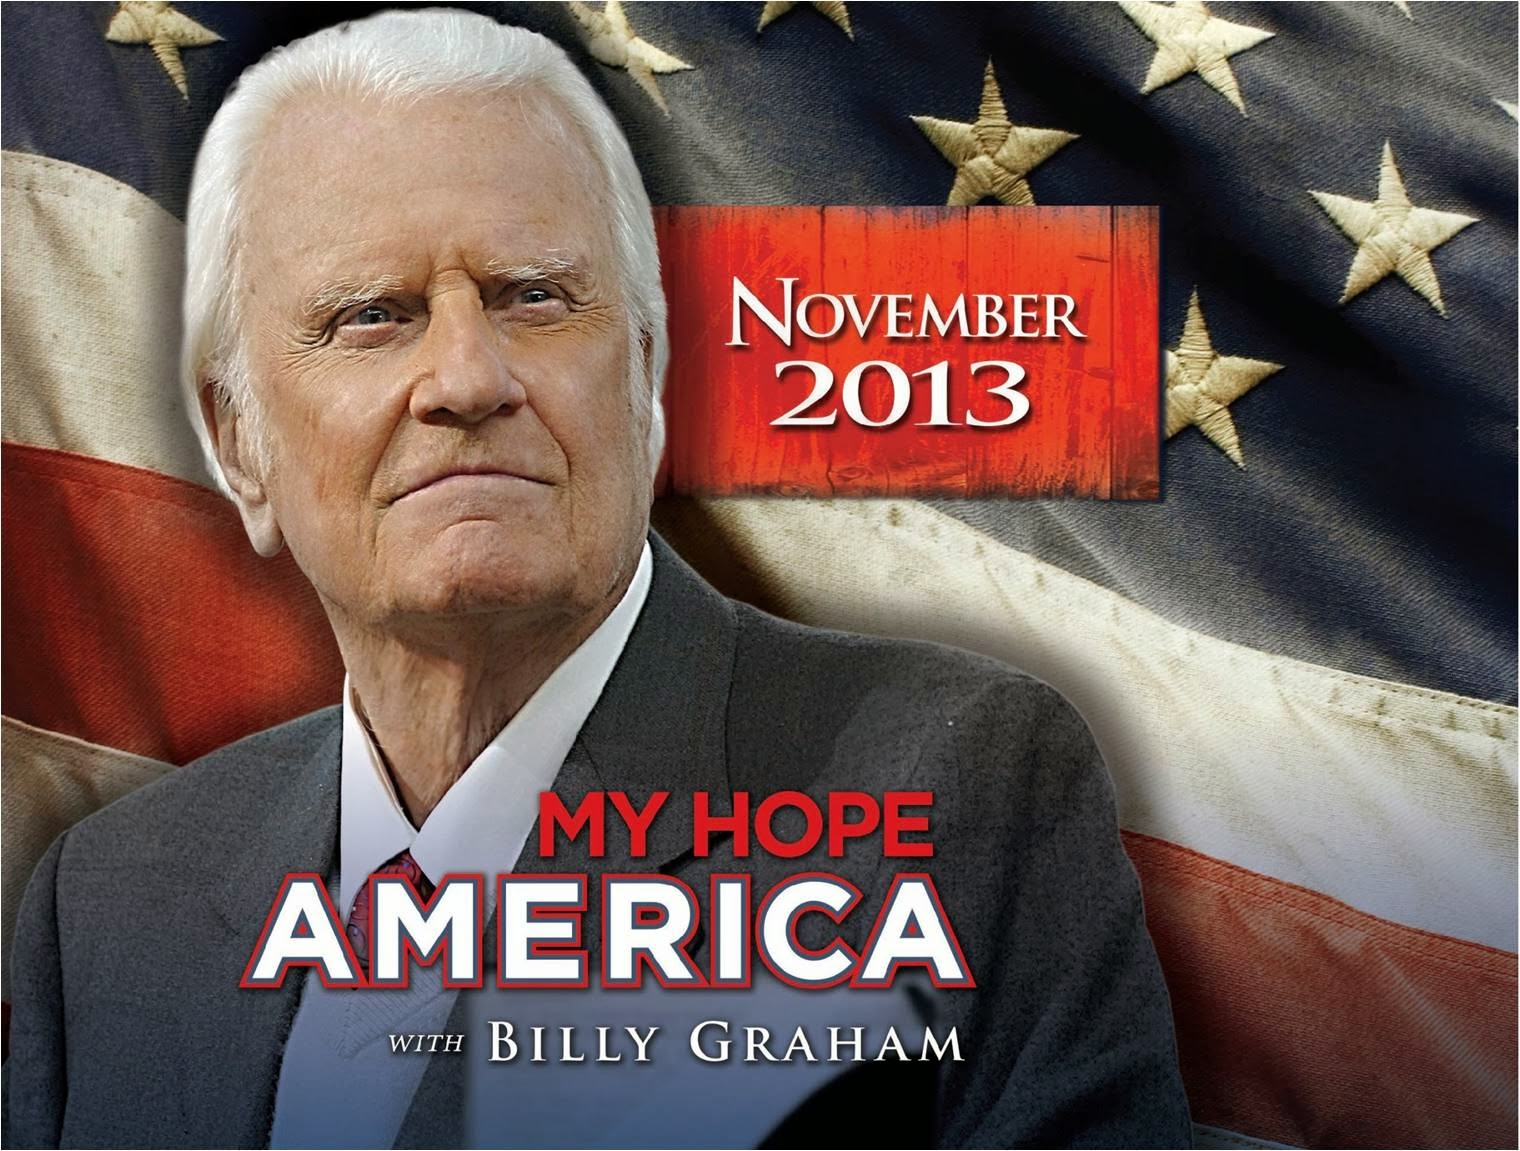 Do You Know Who Billy Graham Is? He Has 'Hope' for You